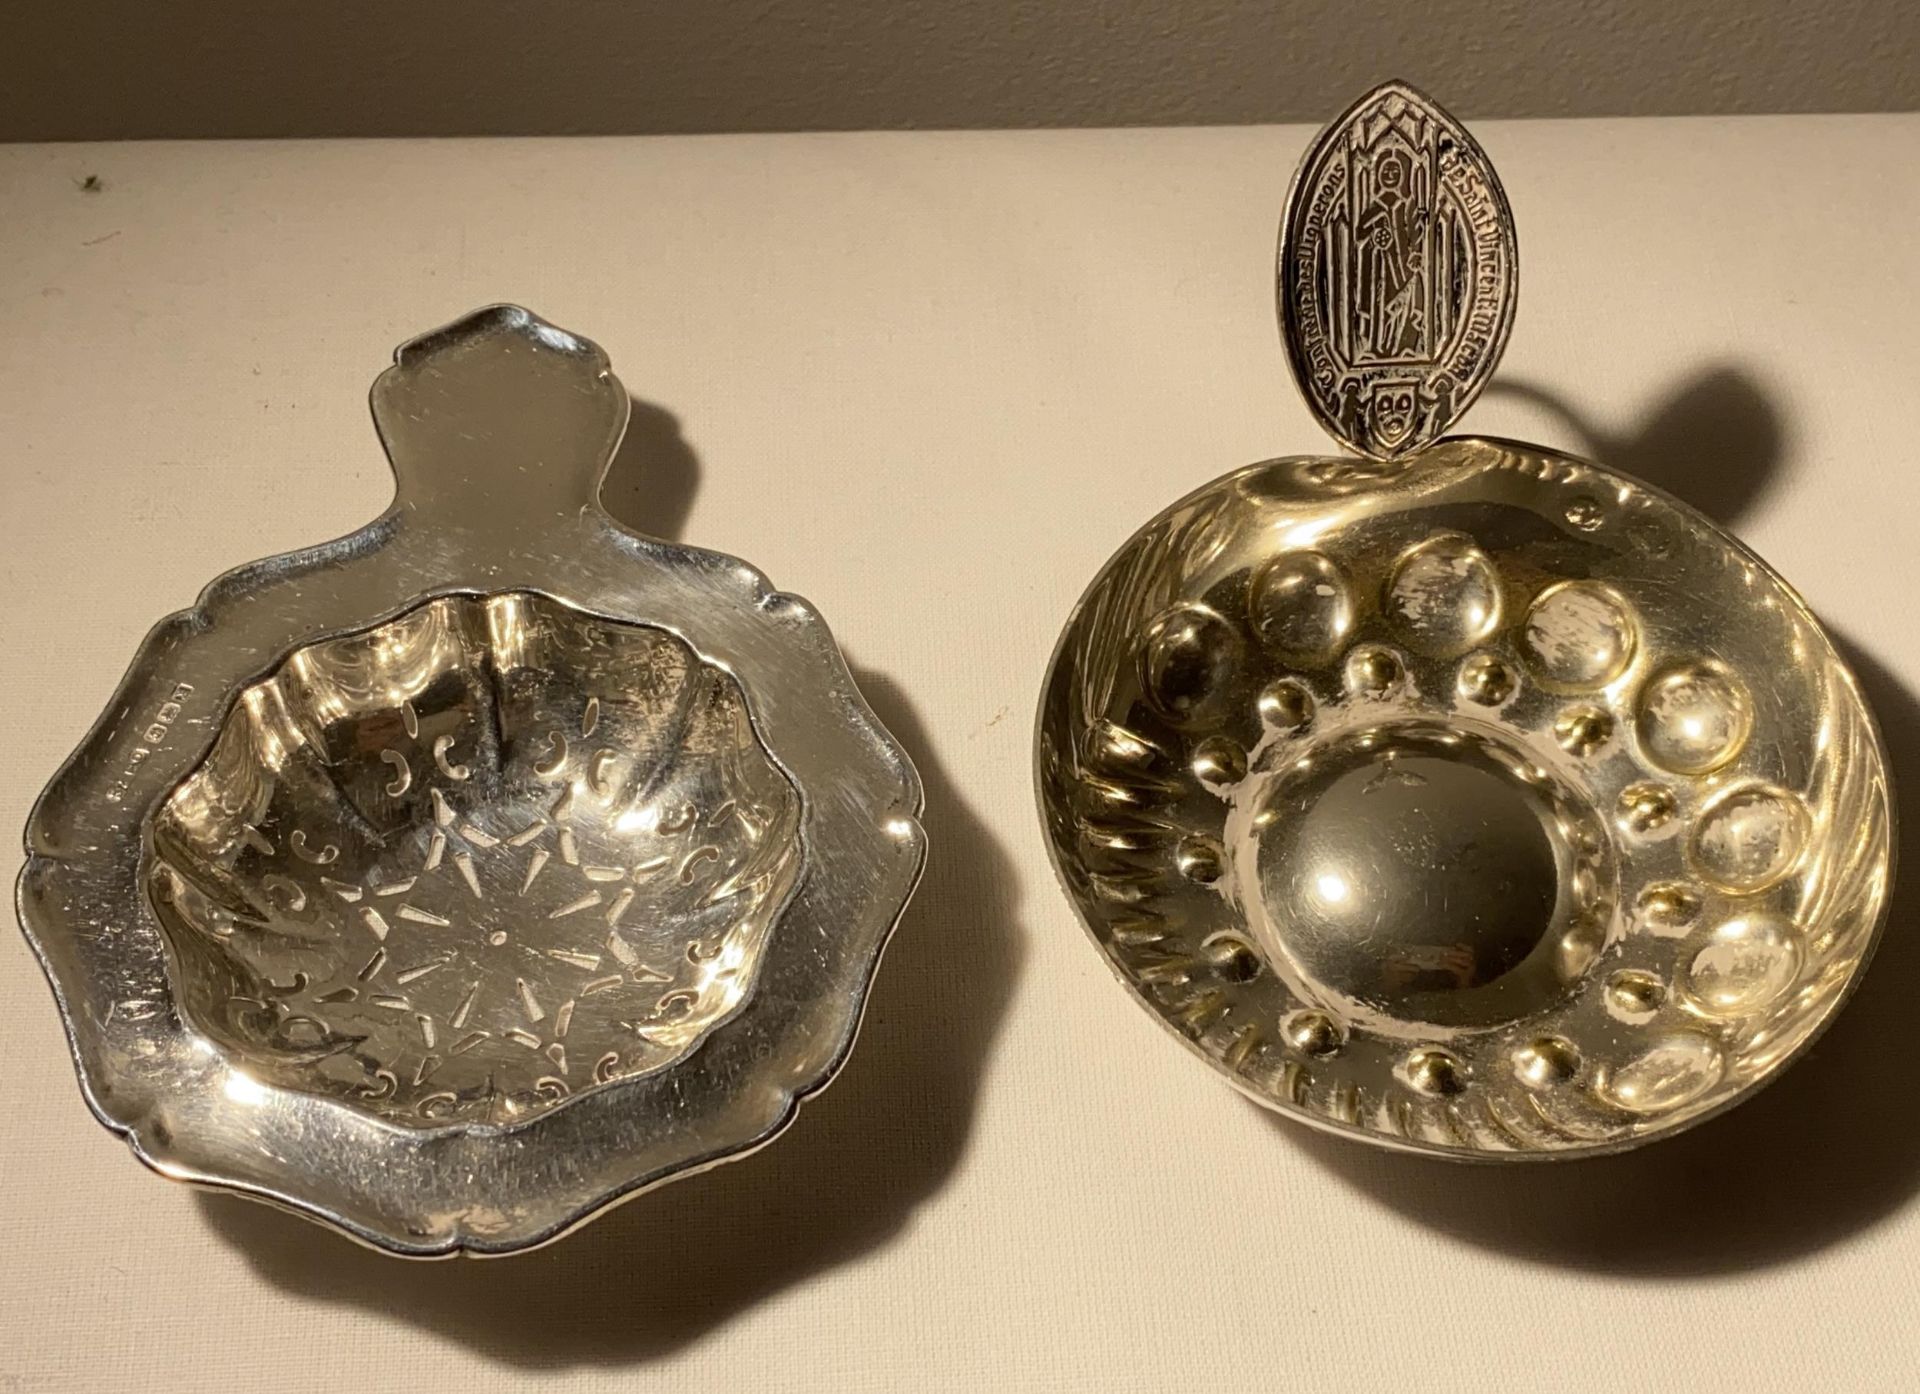 TWO ITEMS - A 1947 HALLMARKED BIRMINGHAM TEA STRAINER AND A WINE CUP MARKED WITH SAINT VINCENT